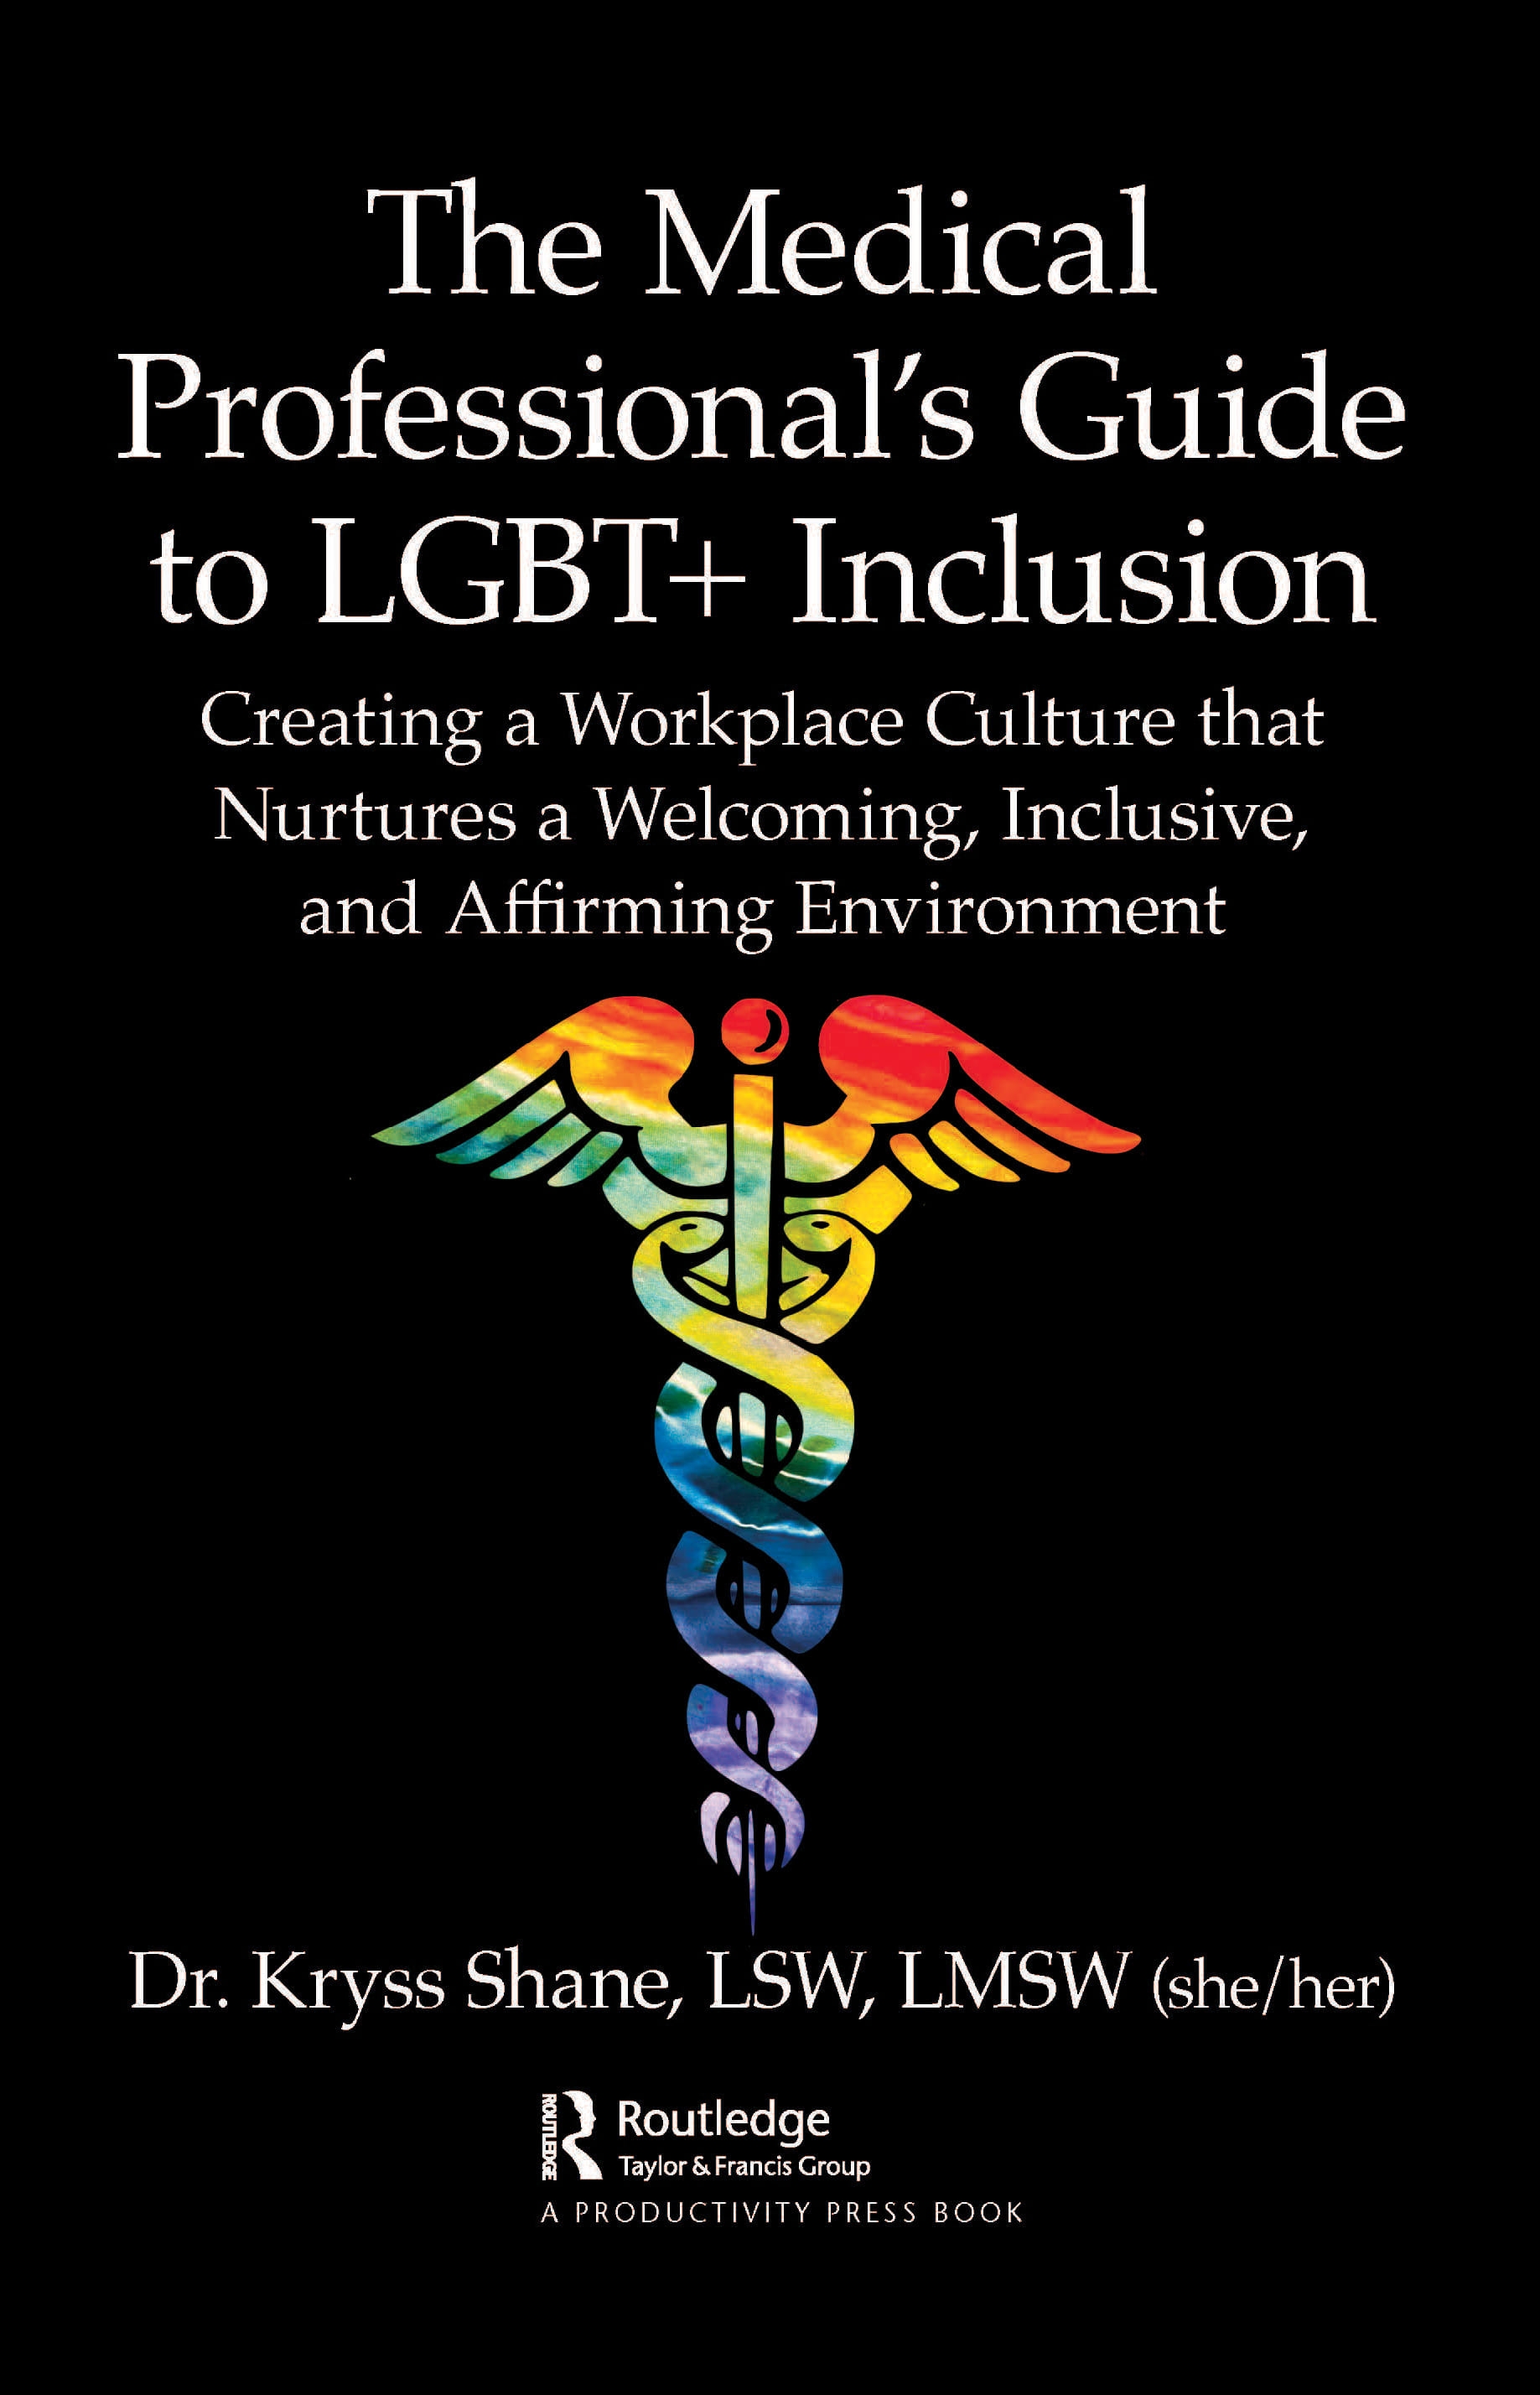 The Medical Professional’s Guide to Lgbt+ Inclusion: Creating a Workplace Culture That Nurtures a Welcoming, Inclusive, and Affirming Environment